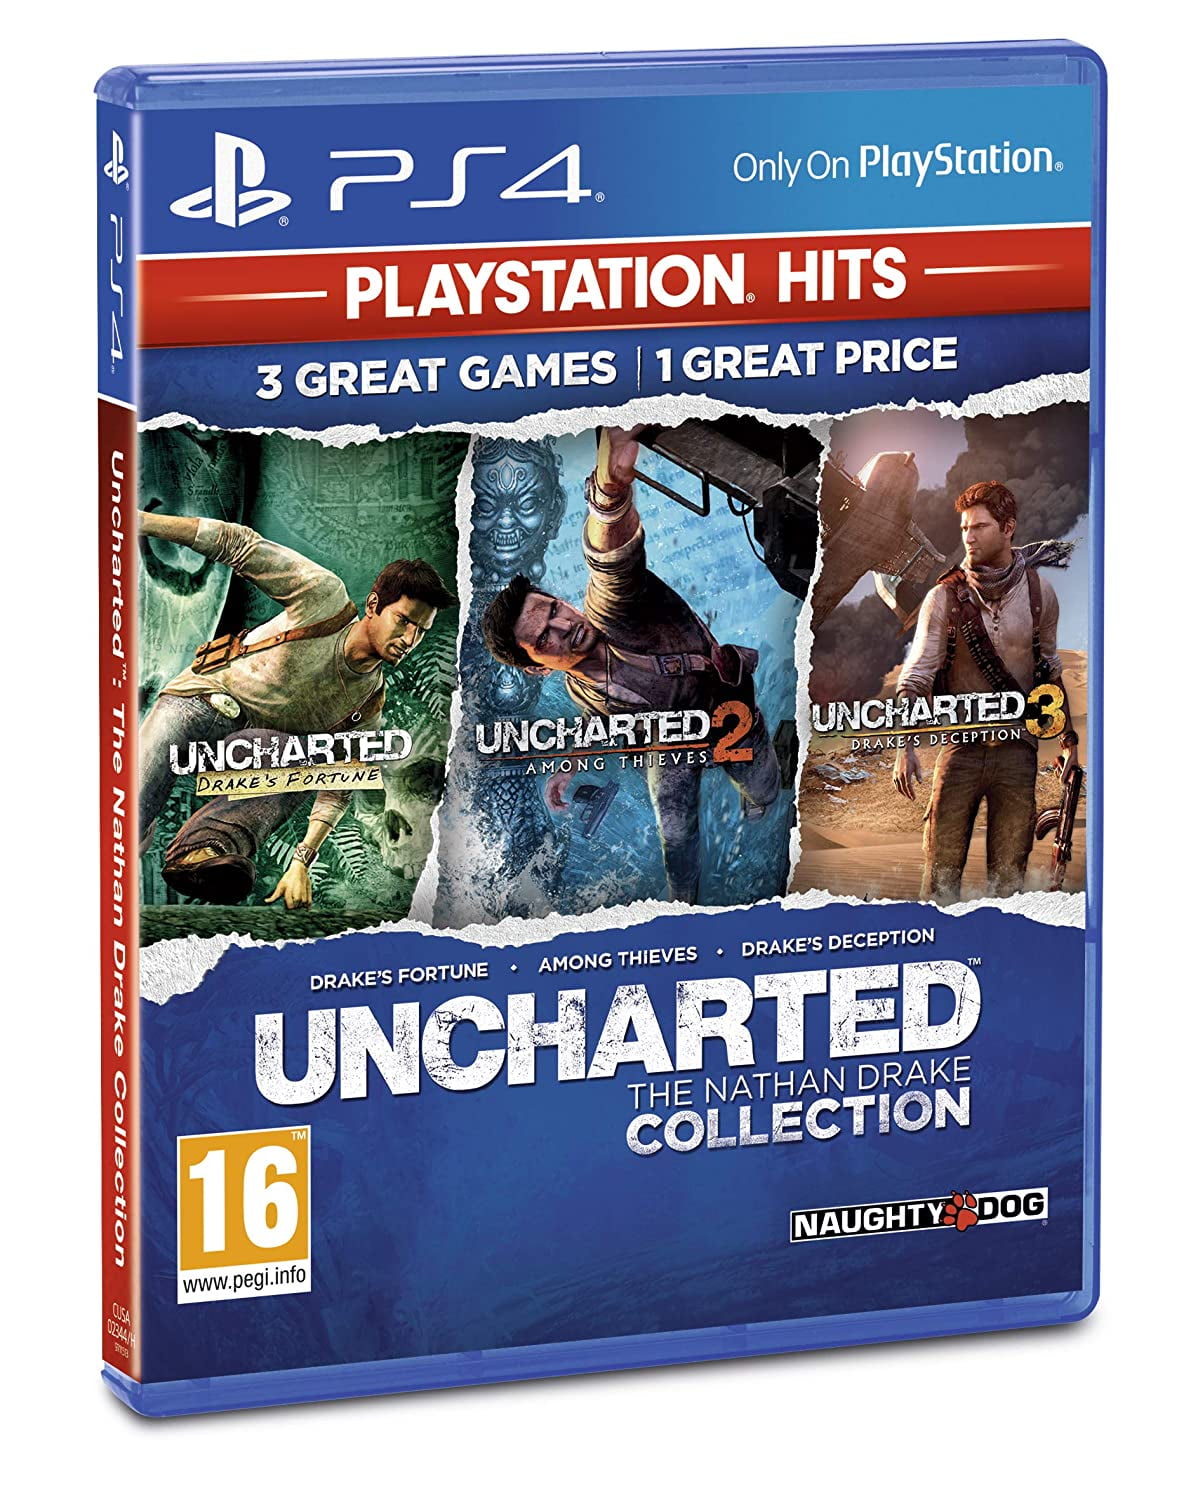 Uncharted The Nathan Drake Collection (Playstation 4 / PS4) 3 Great Games!  